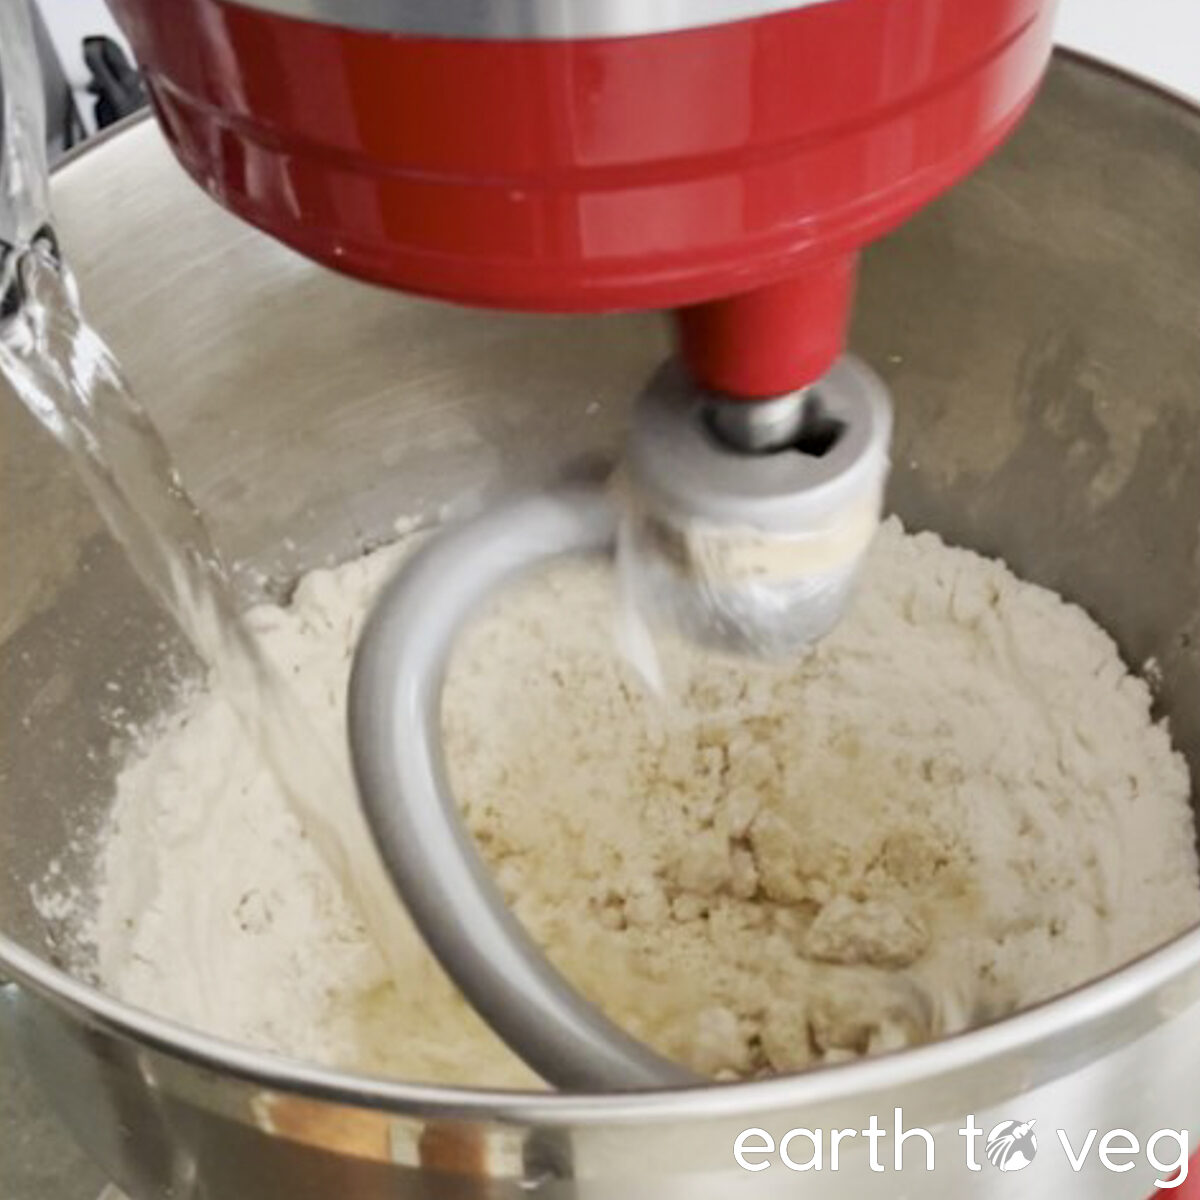 Boiling water is poured into a spinning stand mixer.